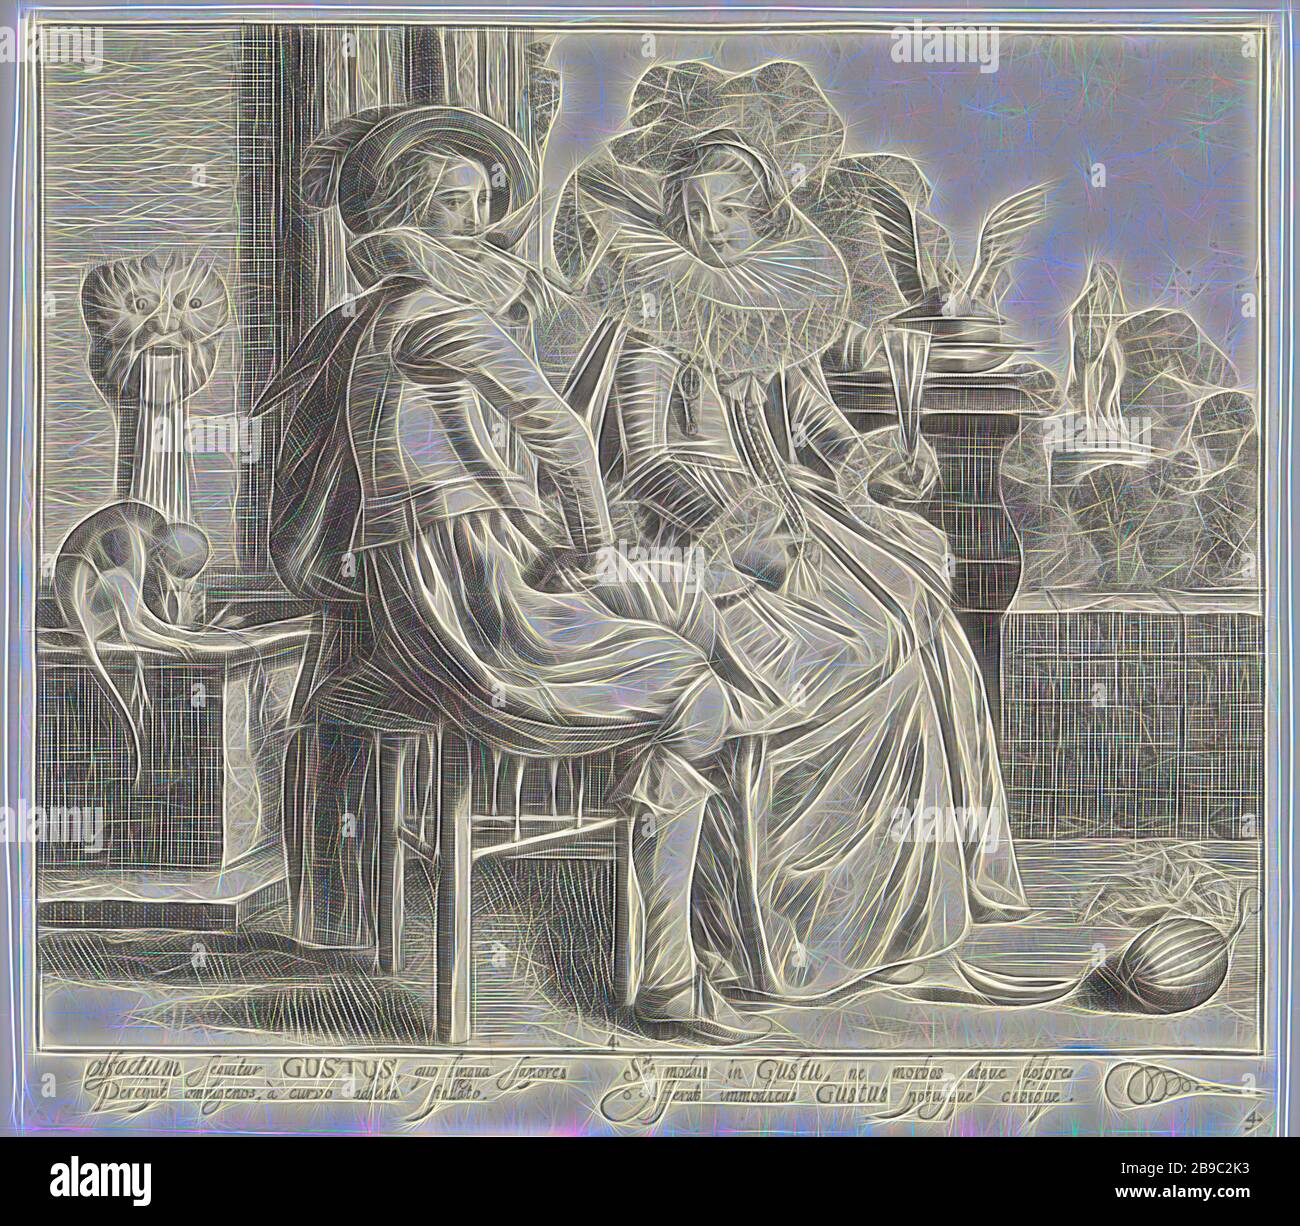 Gustus / De Smaak Five senses (series title), On a platform - overlooking a garden - sits an elegant couple, dressed in the fashion of ca. 1625-'30. The lady has a glass in the left hand and wears a frock with a very wide millstone collar. There is a melon on the floor in front of the couple and a monkey sitting by the fountain holding a fruit by its snout. Below the image two columns with Latin text. The print is part of a series with prints on the five senses, clothes, costume (men's clothes), costume (women's clothes), neck-gear, clothing (with NAME) (women's clothes), clothing (with NAME) Stock Photo